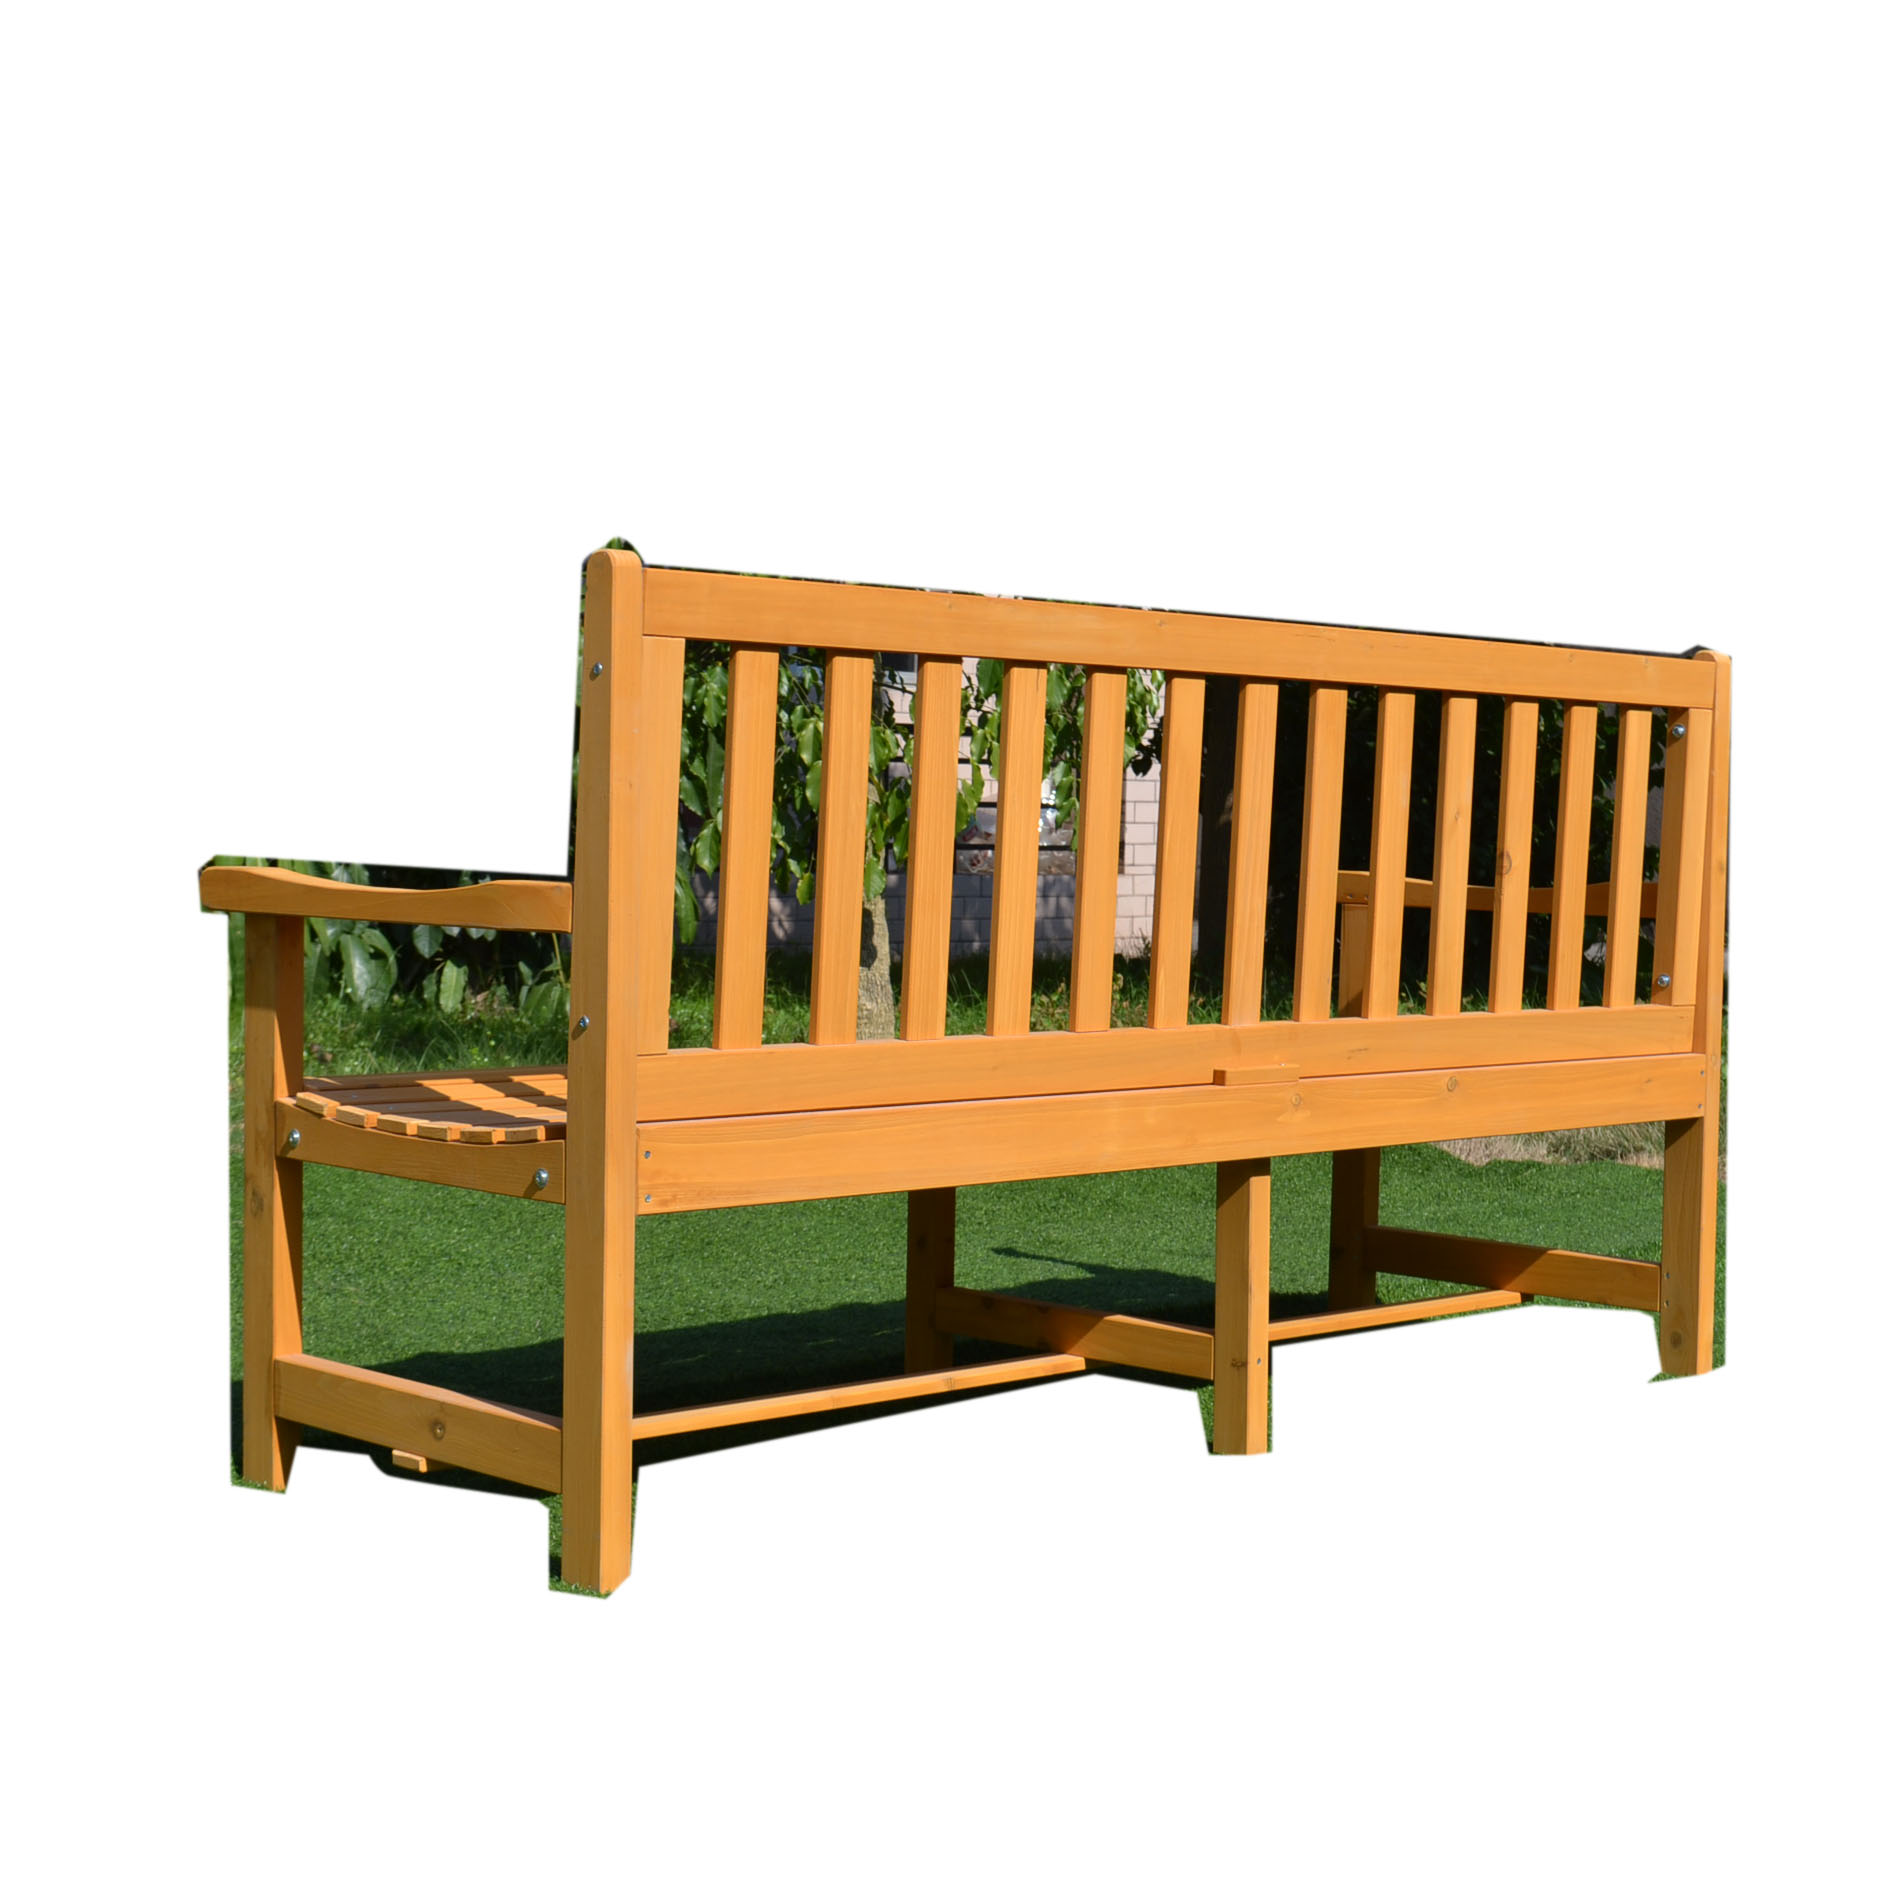 factory Outdoor park Patio Long Bench Wood Garden furniture chairs